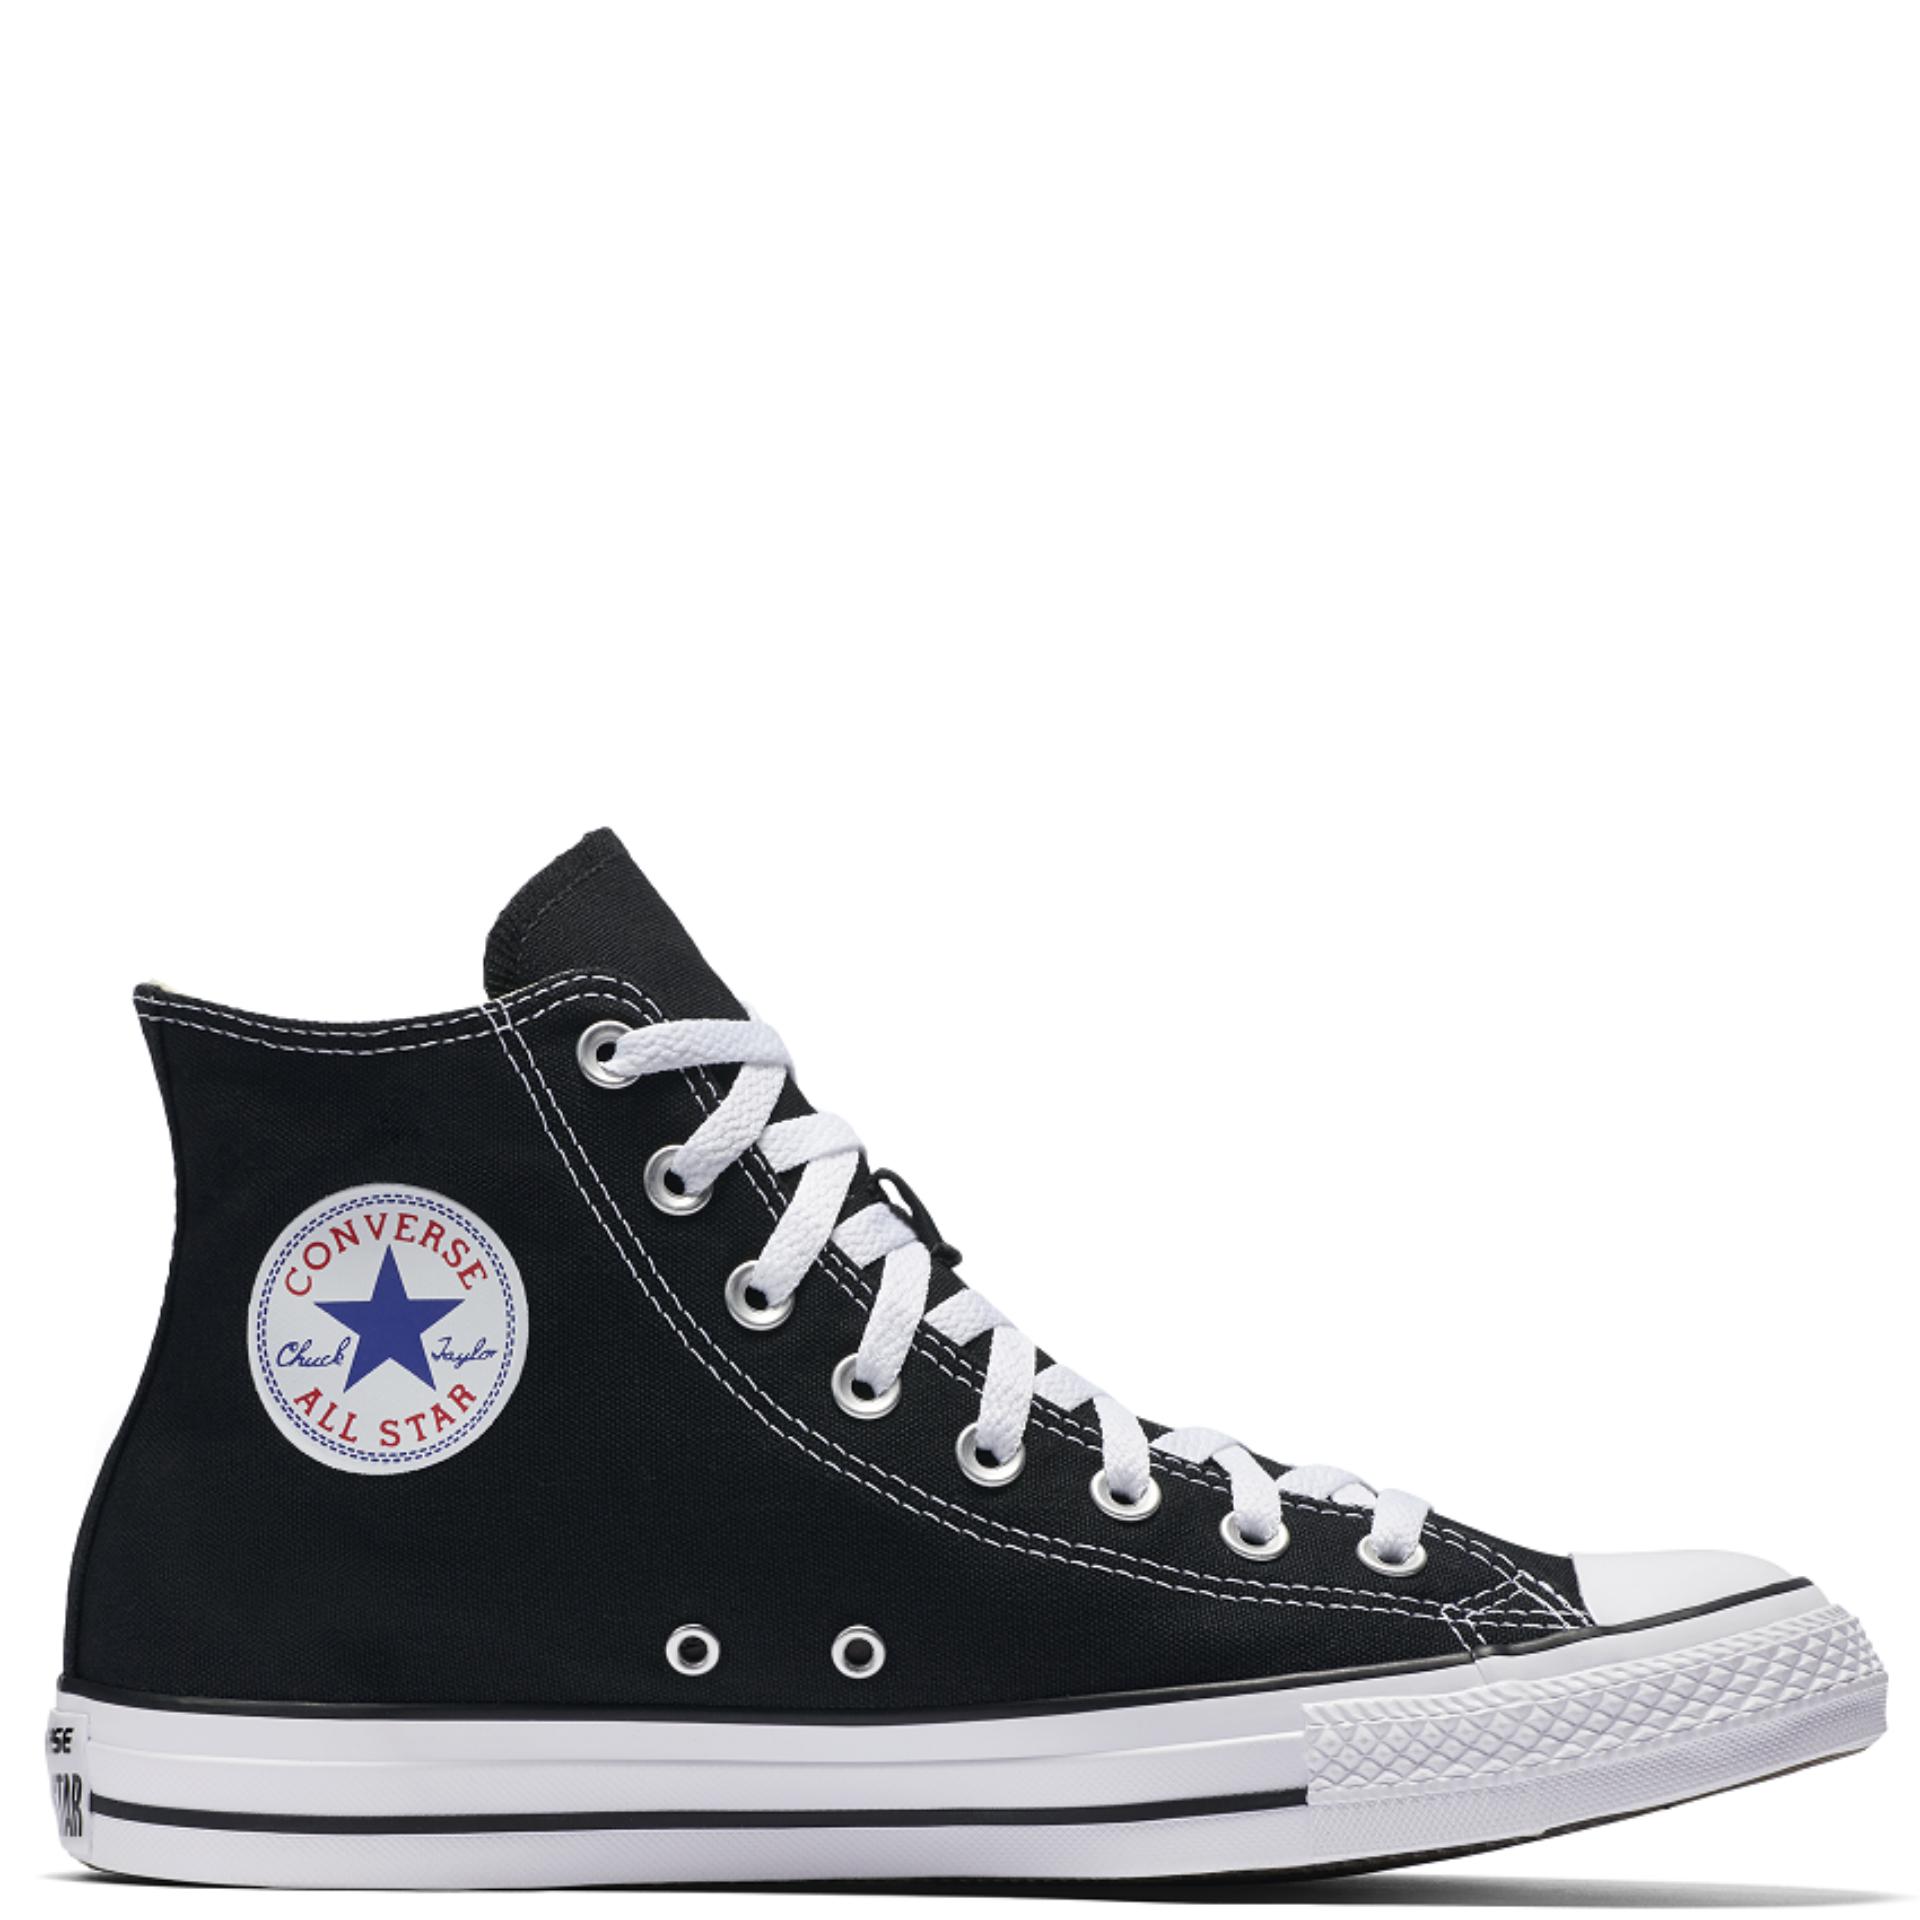 Converse Original Price In Malaysia : Converse makes sneakers and ...